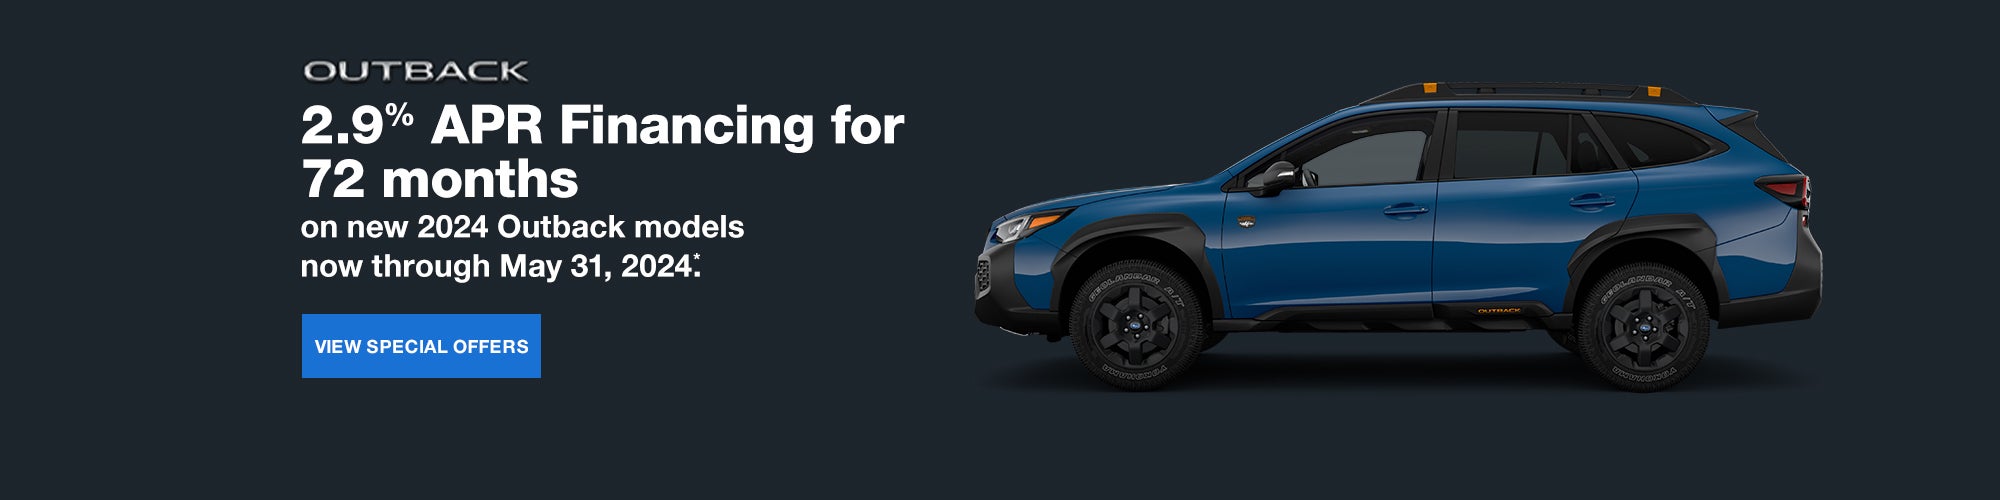 2.9% APR Financing for 72 months | Outback